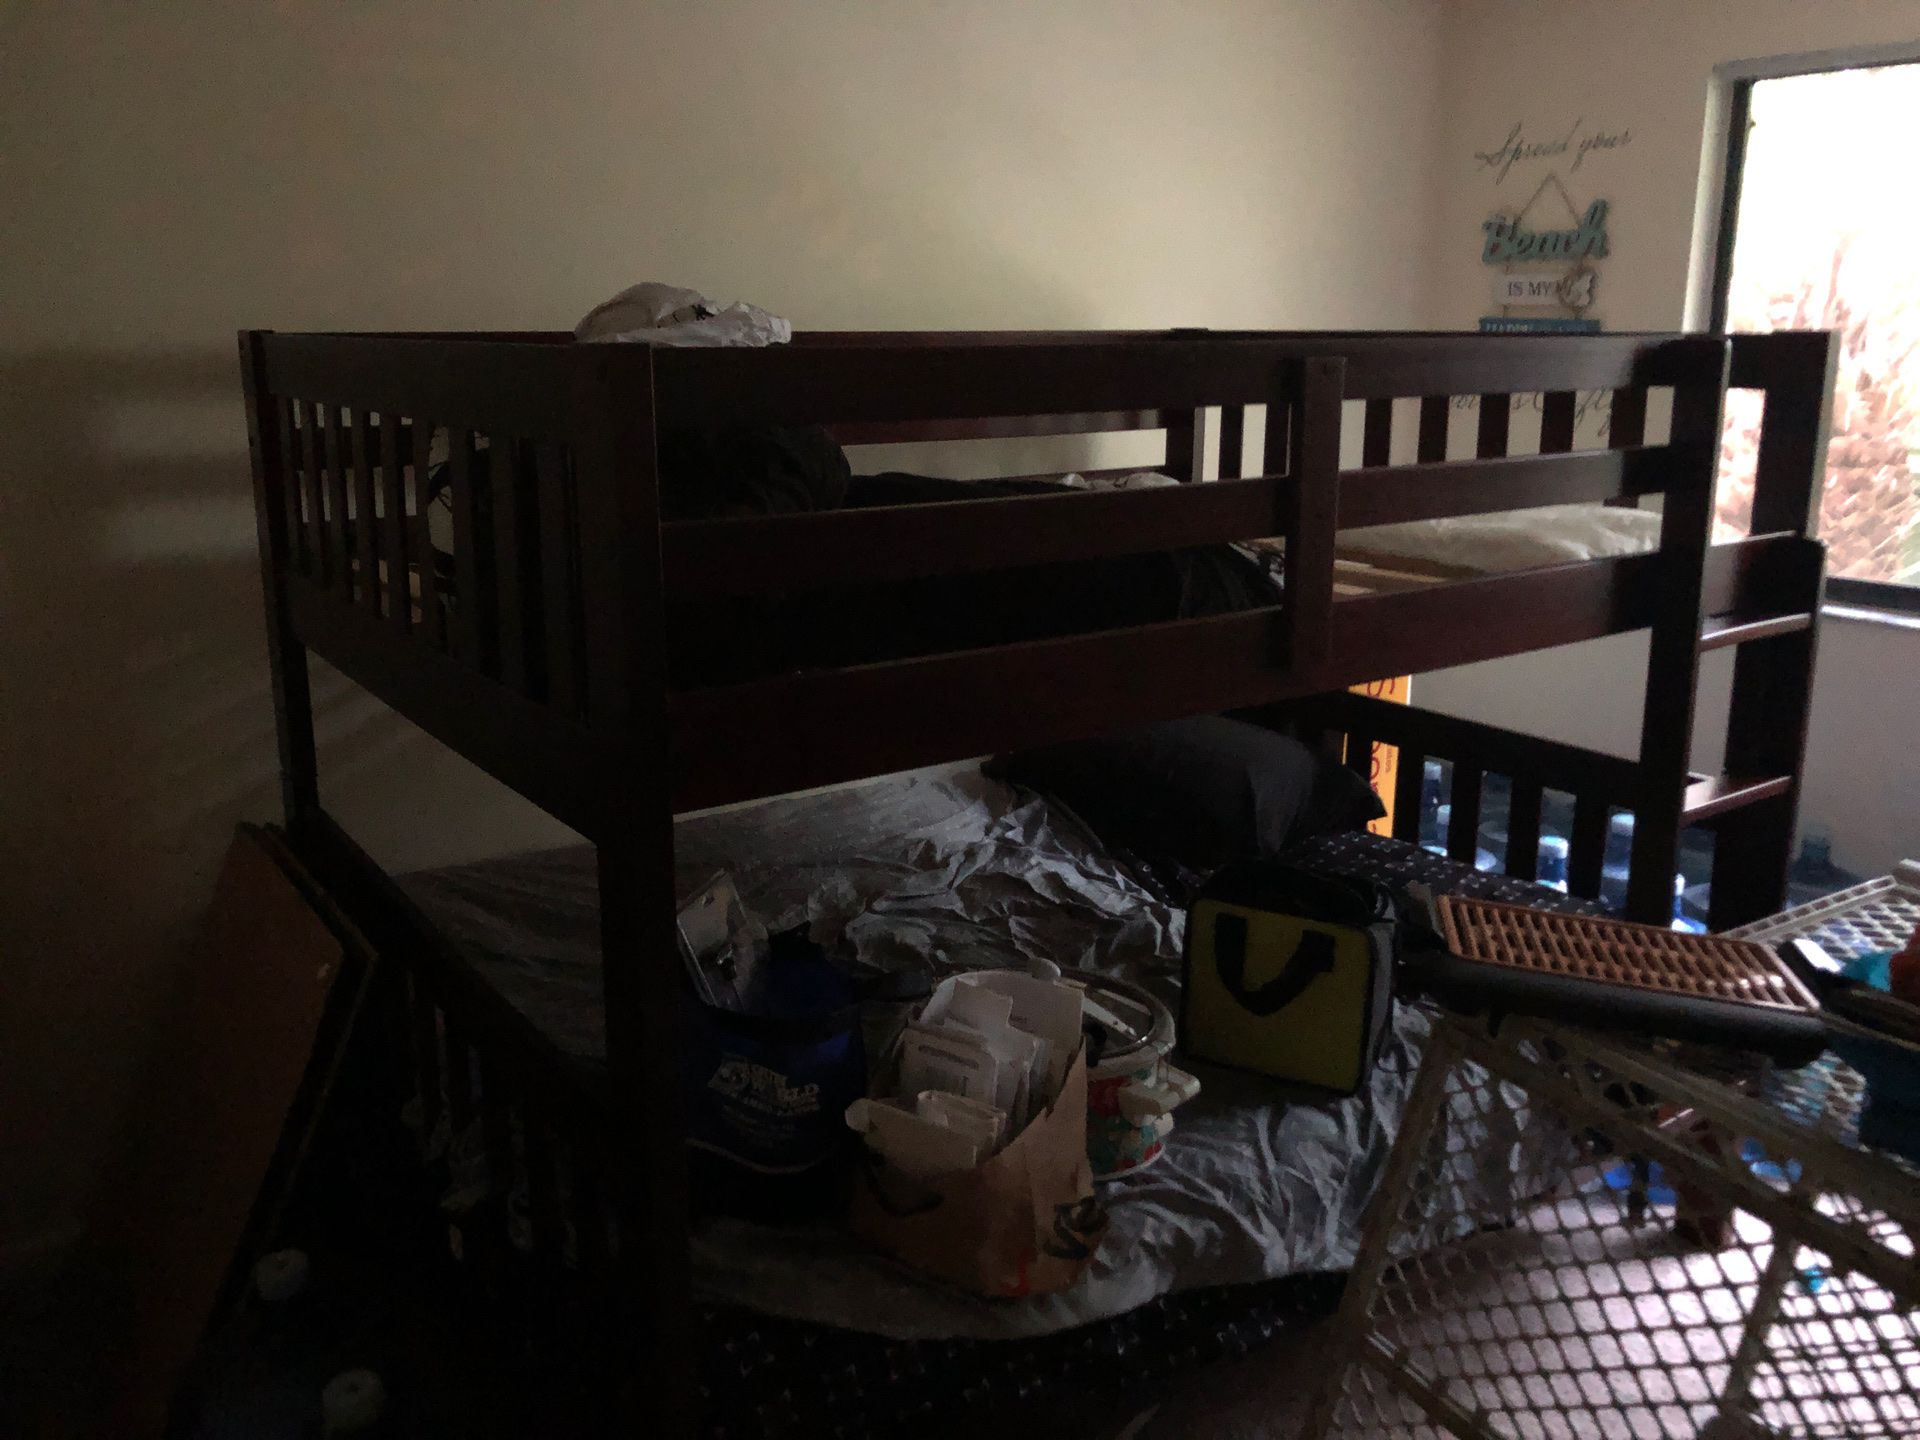 Full overfull bunk bed set never used no mattresses